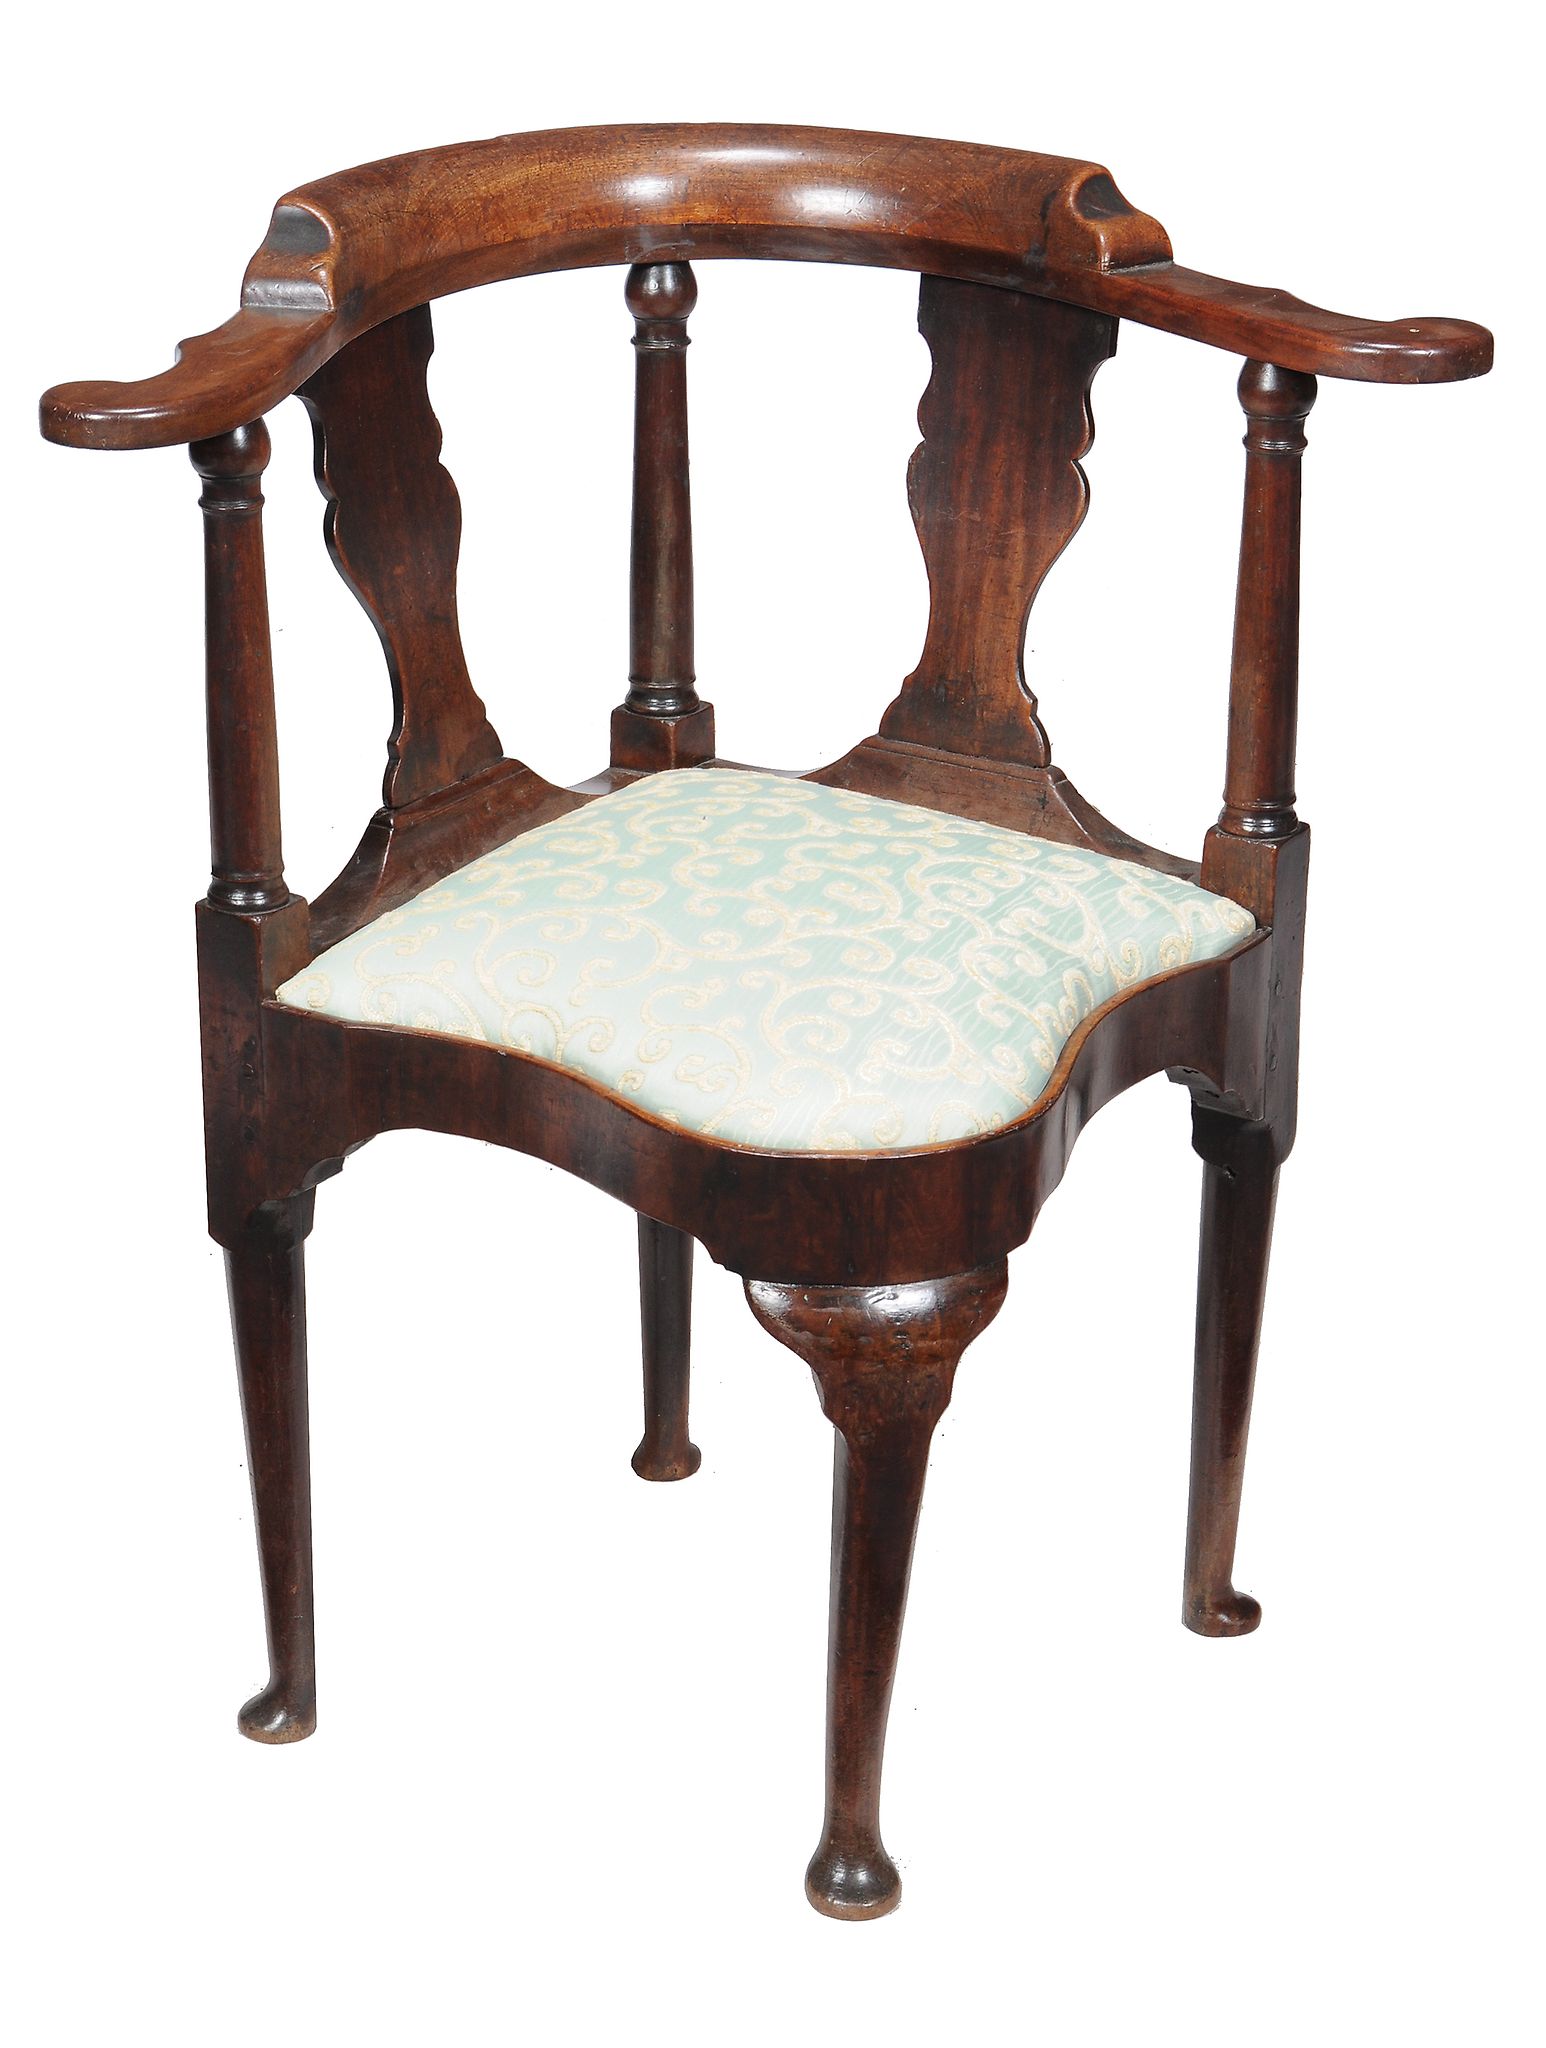 An early George III corner chair , circa 1760, with fiddle backs and columnar supports above shaped